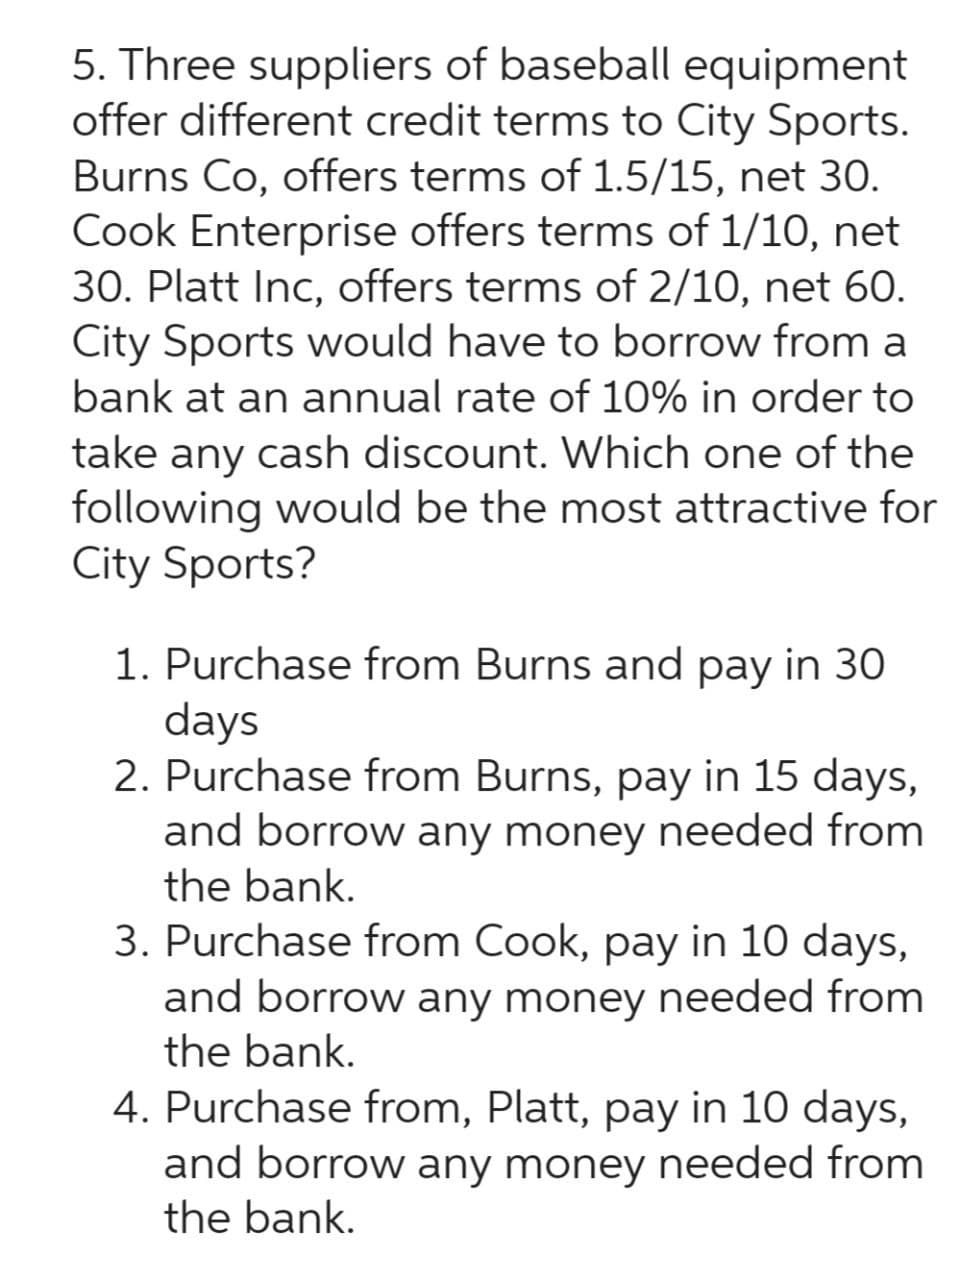 5. Three suppliers of baseball equipment
offer different credit terms to City Sports.
Burns Co, offers terms of 1.5/15, net 30.
Cook Enterprise offers terms of 1/10, net
30. Platt Inc, offers terms of 2/10, net 60.
City Sports would have to borrow from a
bank at an annual rate of 10% in order to
take any cash discount. Which one of the
following would be the most attractive for
City Sports?
1. Purchase from Burns and pay in 30
days
2. Purchase from Burns, pay in 15 days,
and borrow any money needed from
the bank.
3. Purchase from Cook, pay in 10 days,
and borrow any money needed from
the bank.
4. Purchase from, Platt, pay in 10 days,
and borrow any money needed from
the bank.